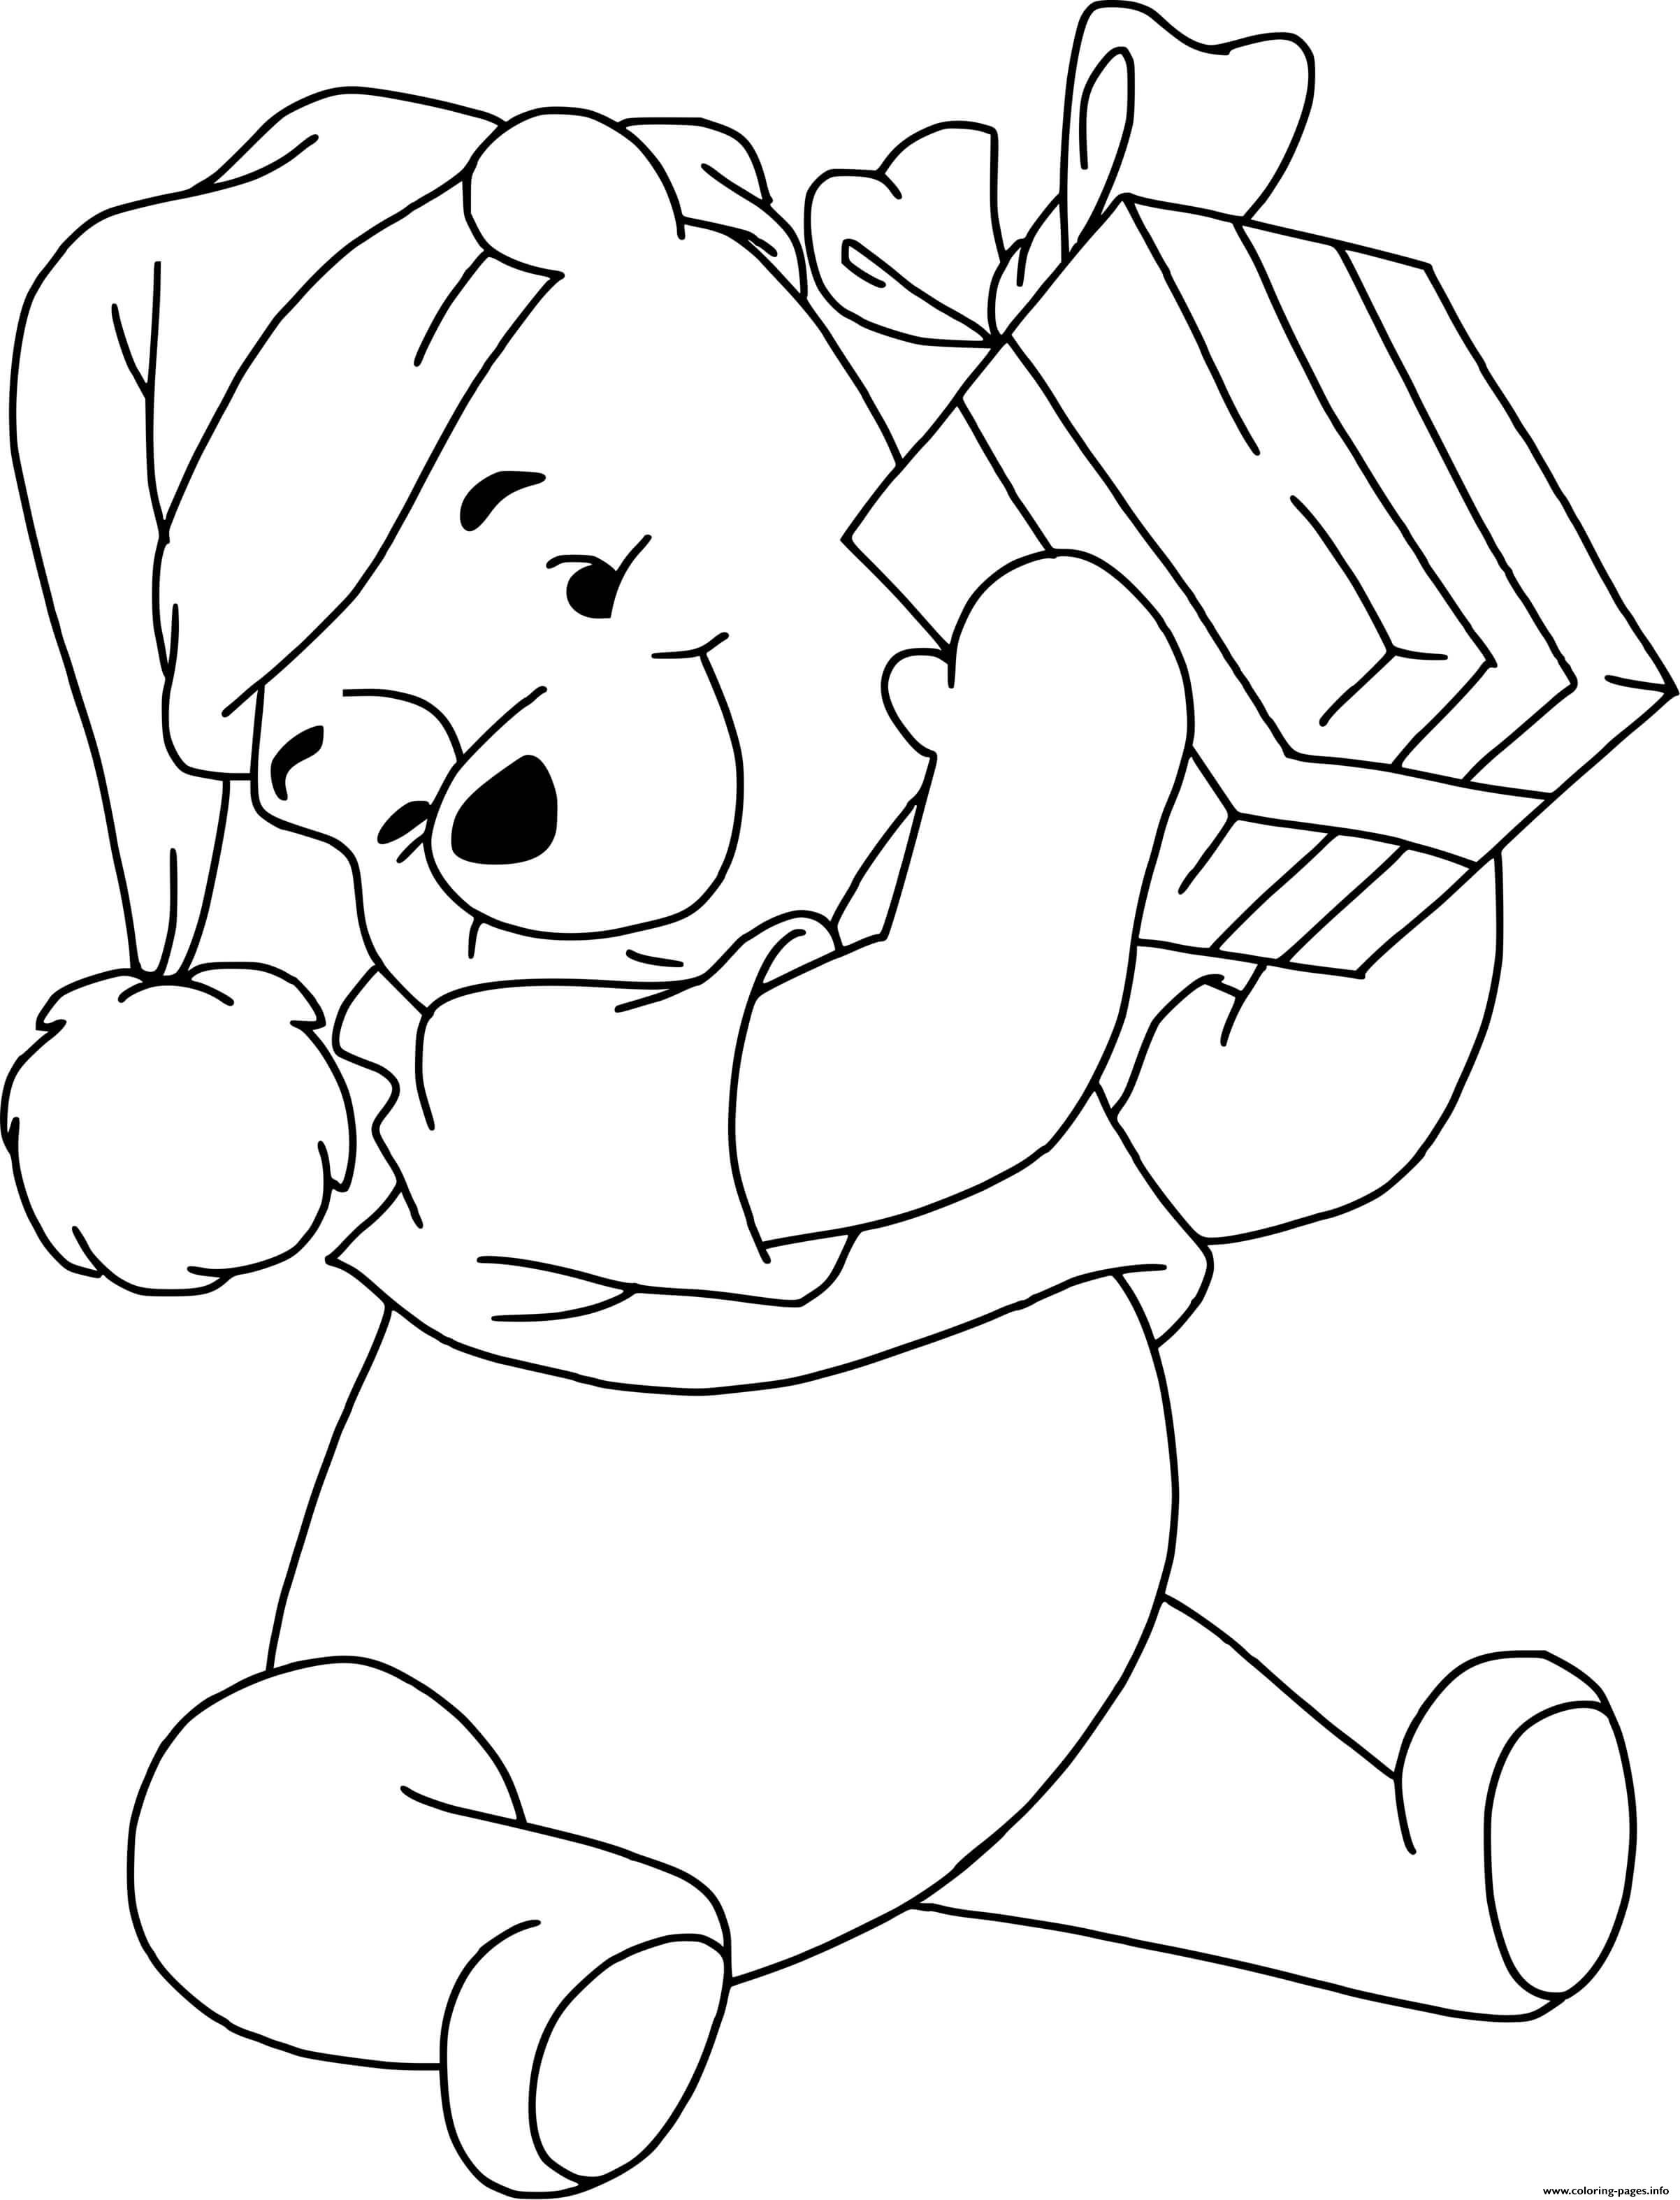 Winnie The Pooh Printable Christmas Coloring Pages 114 winnie the